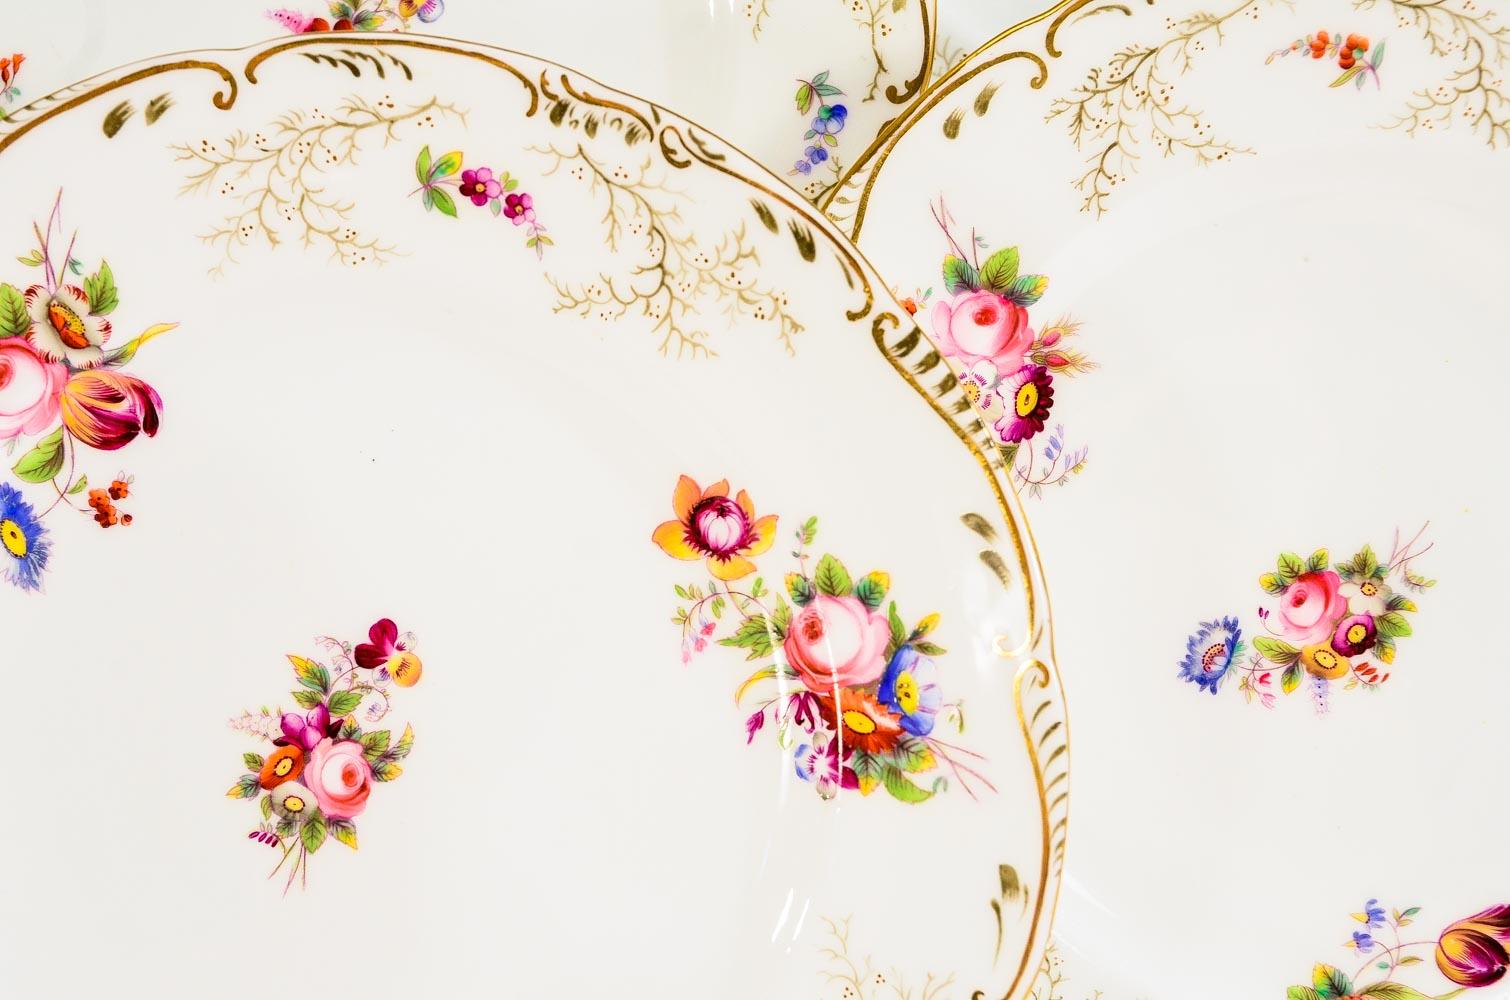 This set of 12 Cauldon 19th c English hand painted dessert plates feature detailed depictions of floral bouquets in bright primary colors that will blend beautifully with many styles and colorways. Add these to cobalt blue, cranberry, green or pink